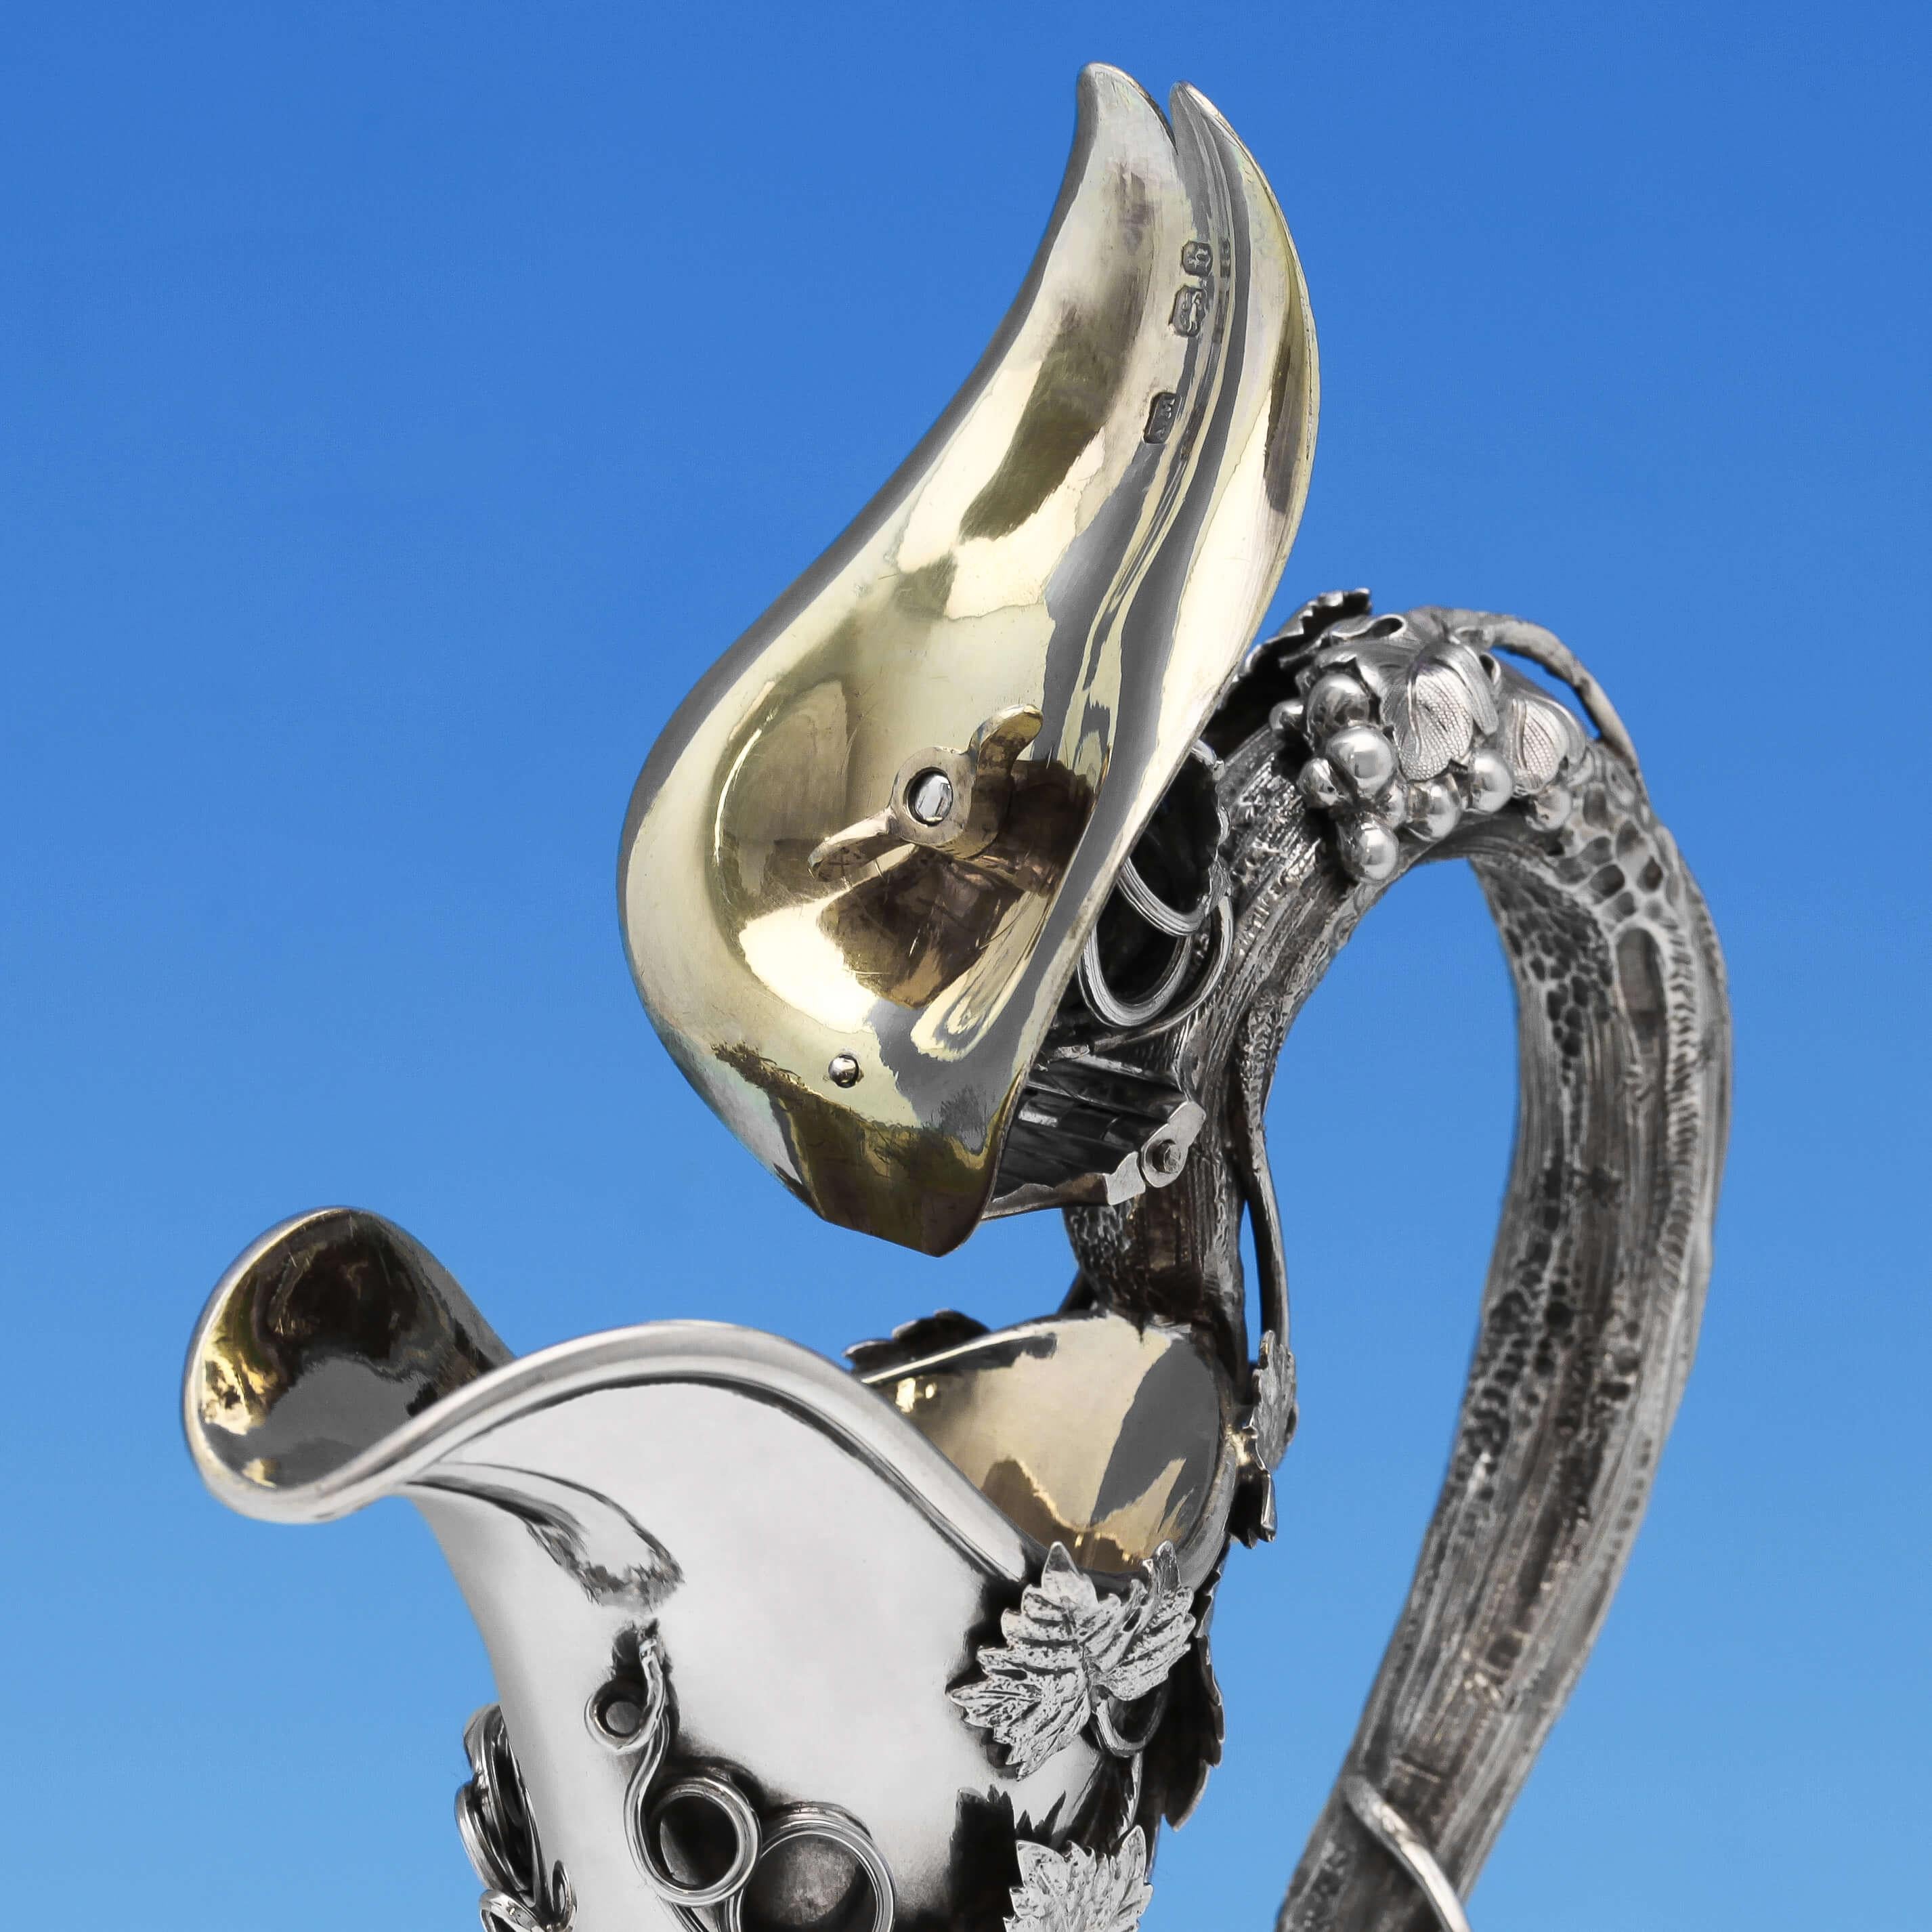 Hallmarked in London in 1857 by Alexander Macrae, this classical Victorian, antique, sterling silver wine ewer, features cast and applied grape and vine decoration, a plain body, and a vine handle. The wine ewer measures: 13.5